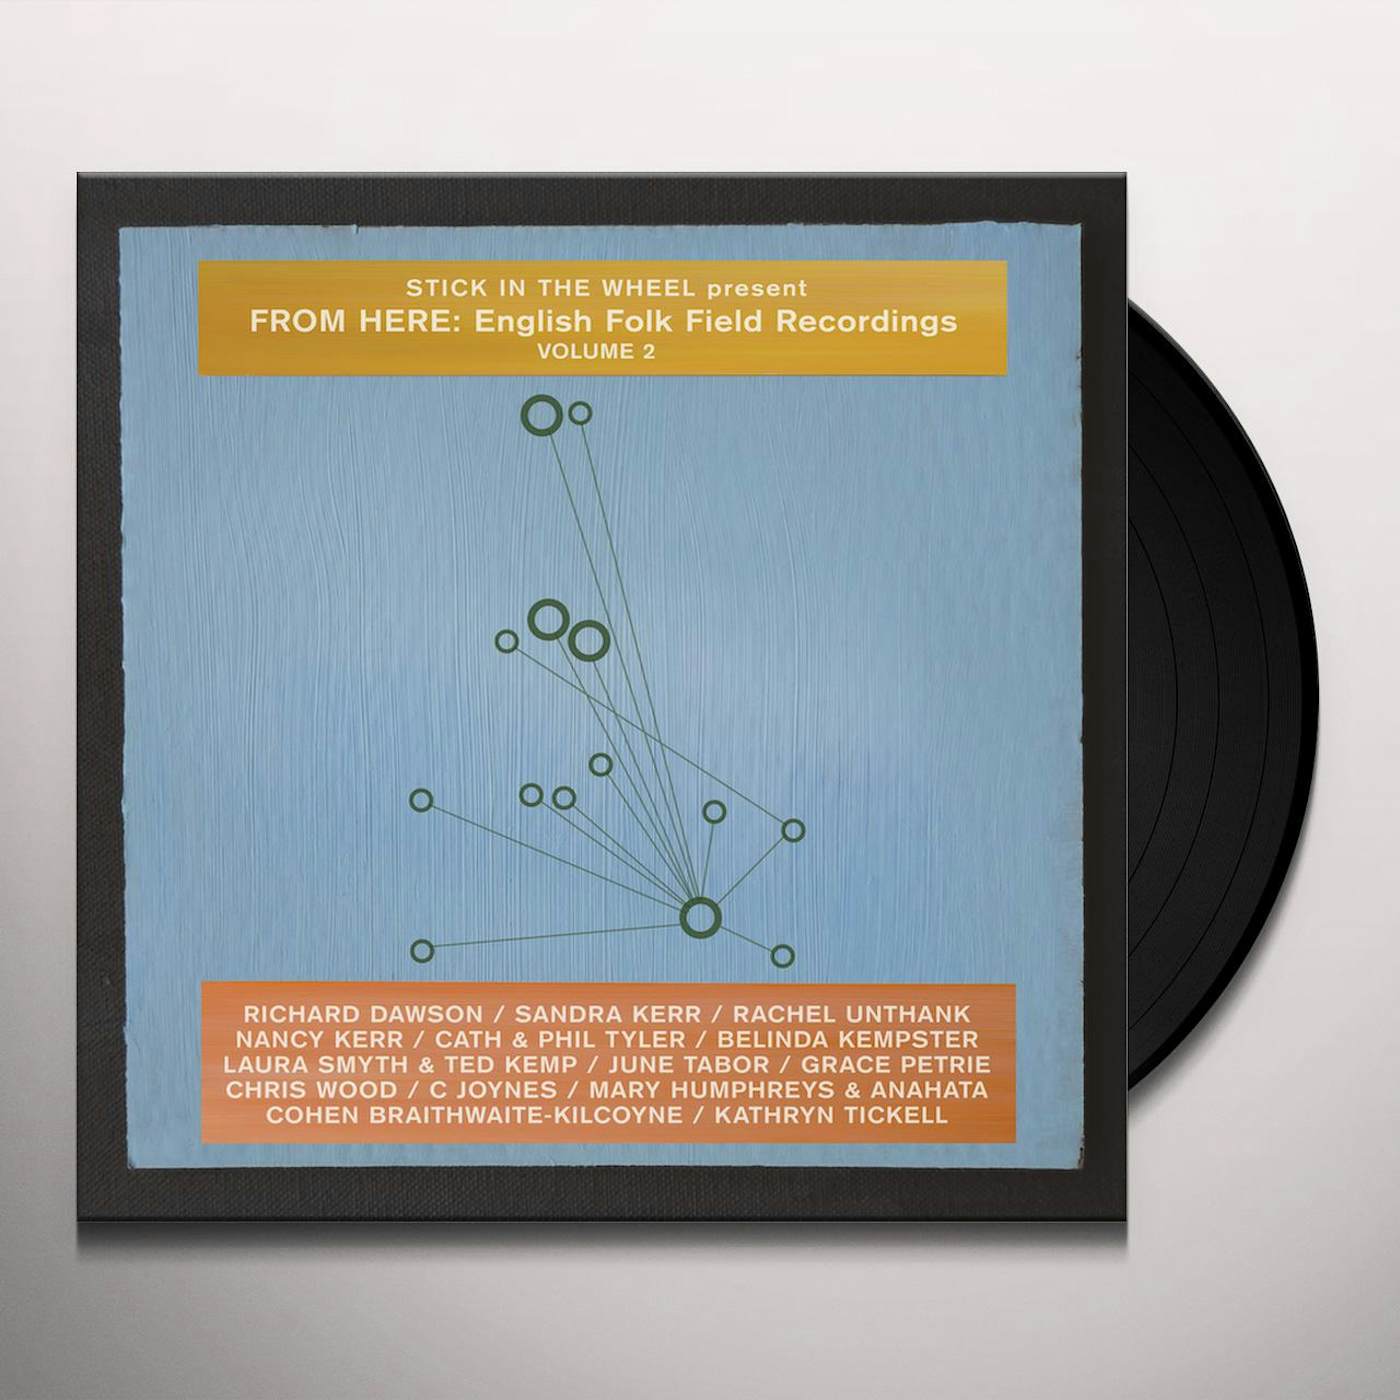 Stick In The Wheel Presents FROM HERE: ENGLISH FOLK FIELD RECORDINGS VOL. 2 Vinyl Record